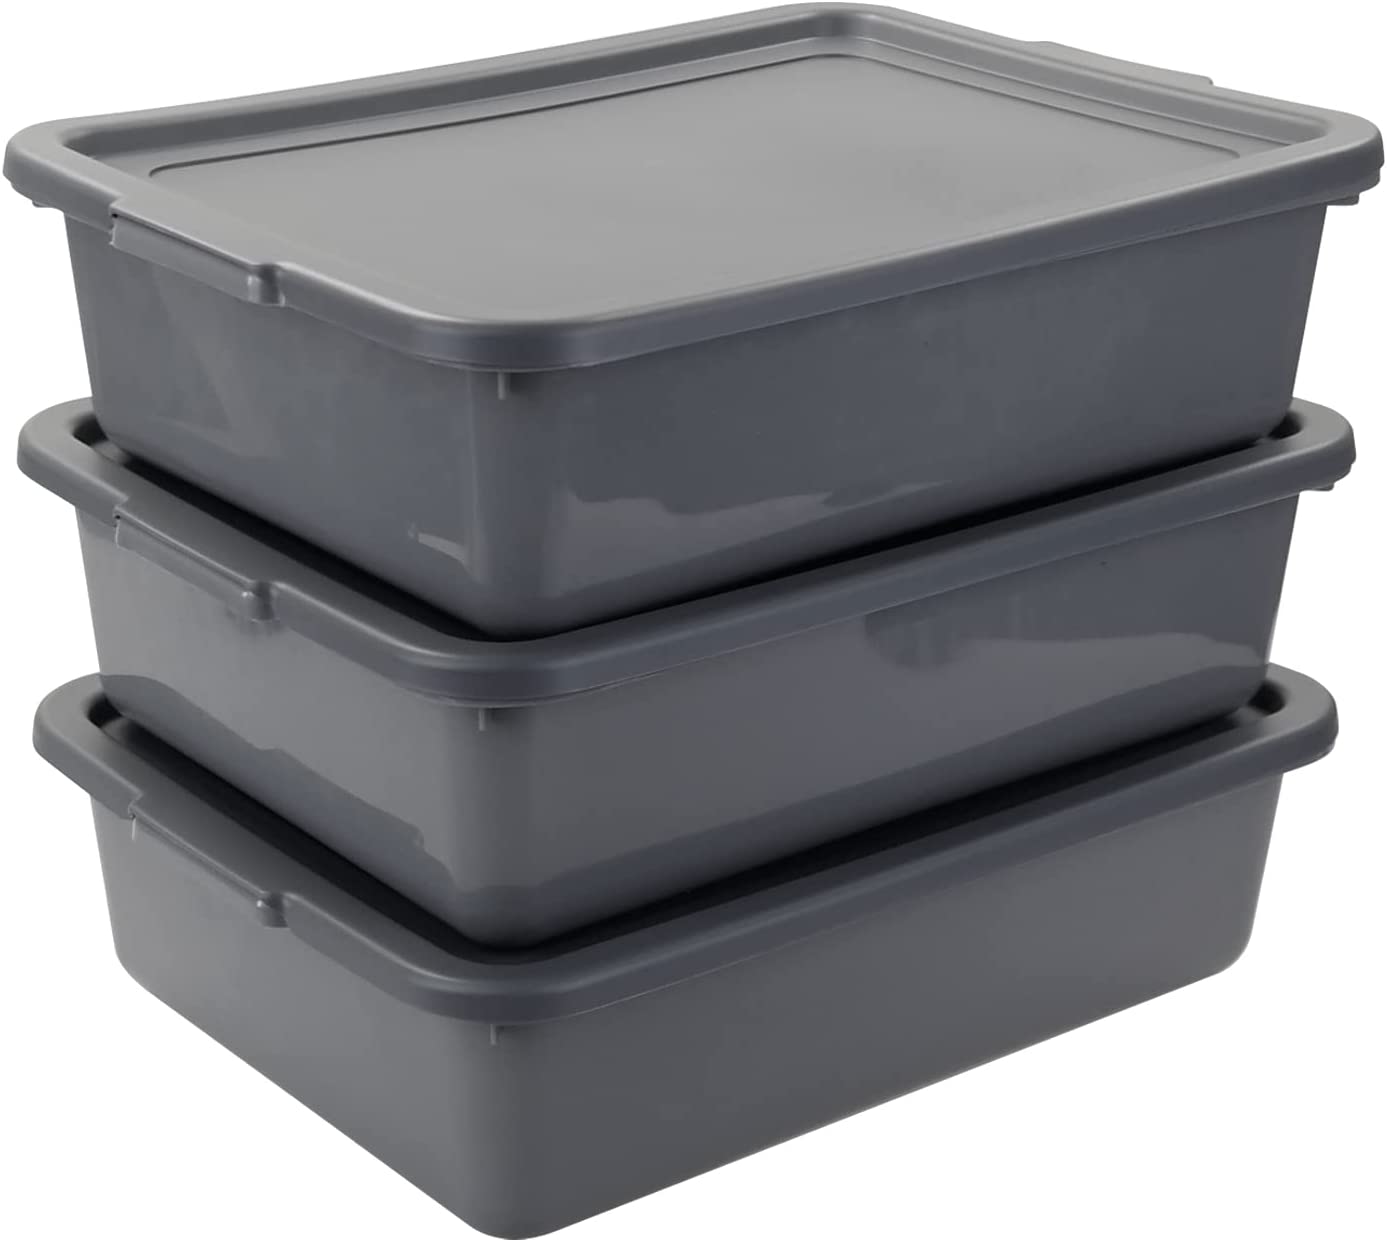 Begale 3-Pack Gray Commercial Utility Bus Box, Plastic Bus Tub with Lids, 13 L